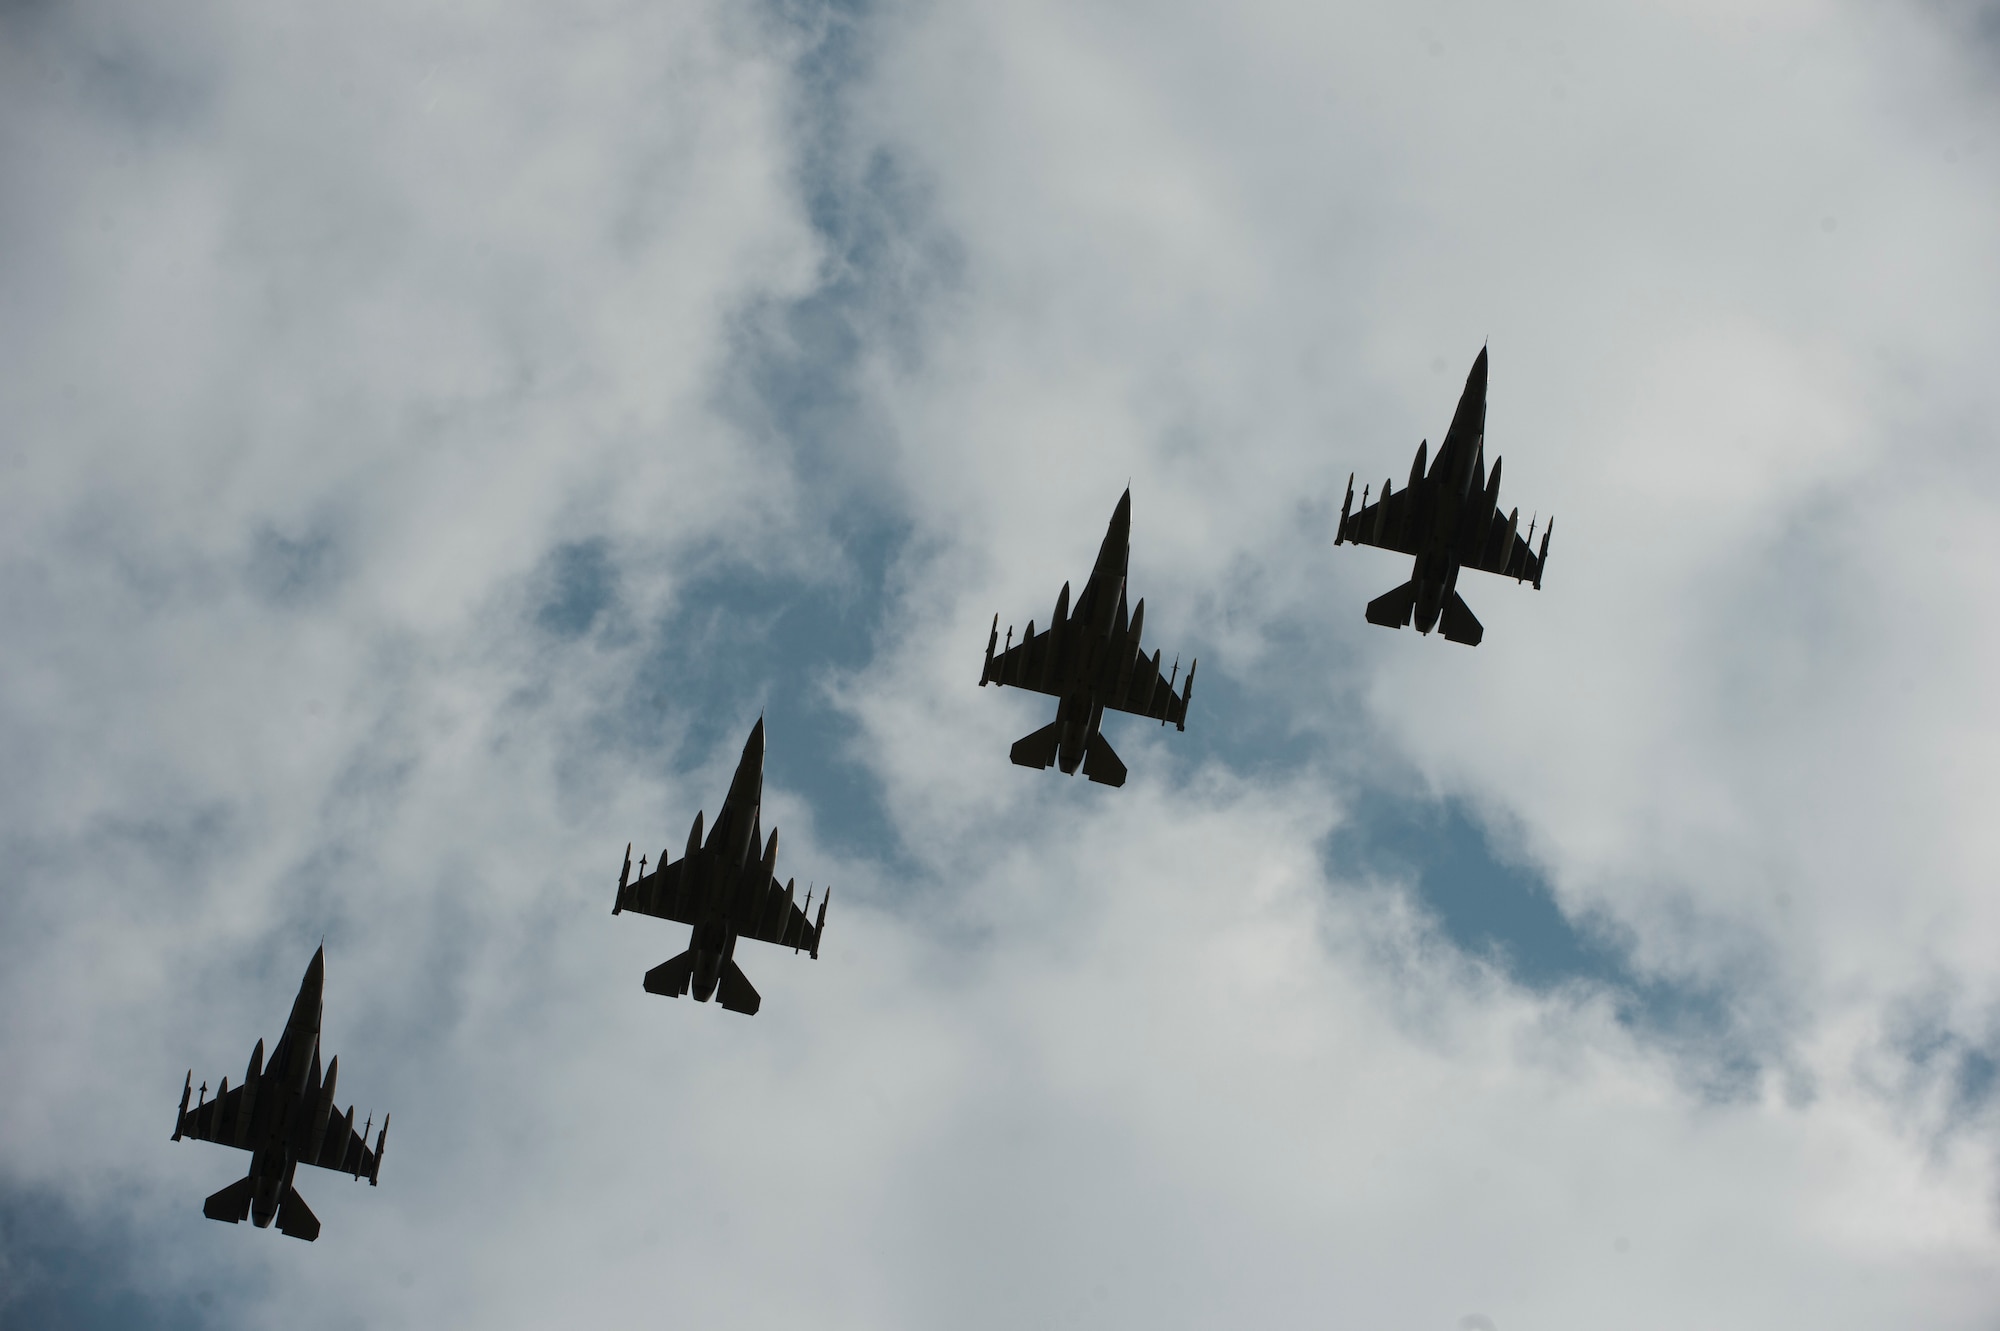 Four F-16C Fighting Falcons from the 31st Fighter Wing, 510th Fighter Squadron, Aviano Air Base, Italy, fly over Royal Air Force Lakenheath, England, July 20, 2018. The 510th FS are participating in a bilateral training event to enhance interoperability, maintain joint readiness and reassure our regional allies and partners. (U.S. Air Force photo by Master Sgt. Eric Burks)